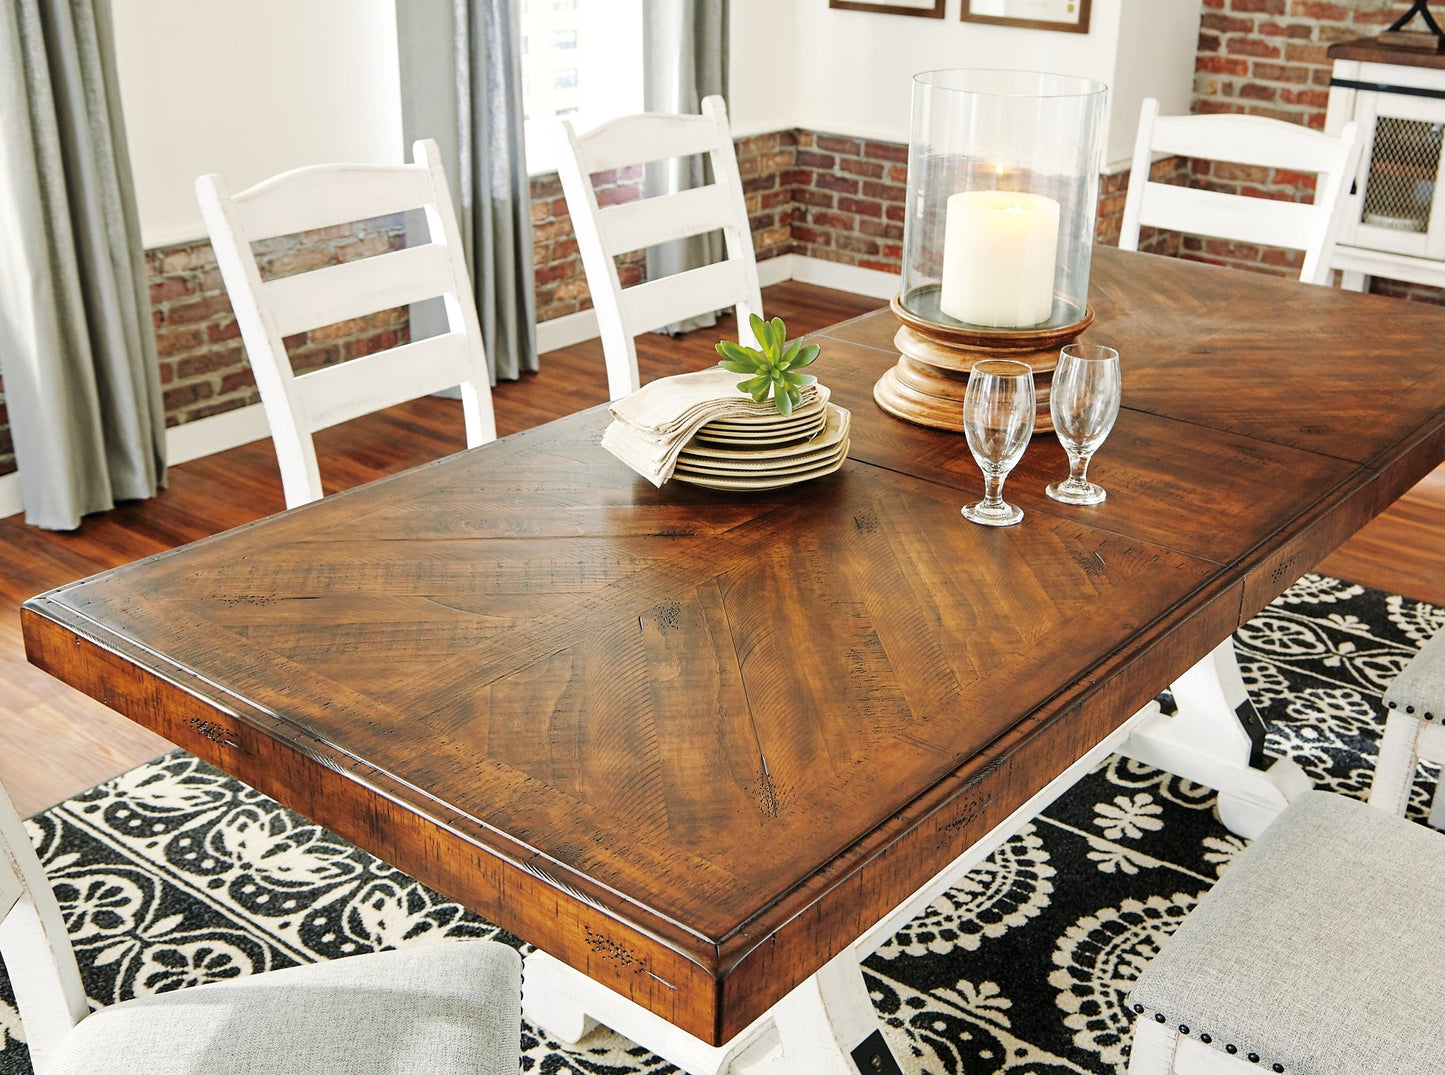 Valebeck Dining Table and 6 Chairs at Walker Mattress and Furniture Locations in Cedar Park and Belton TX.